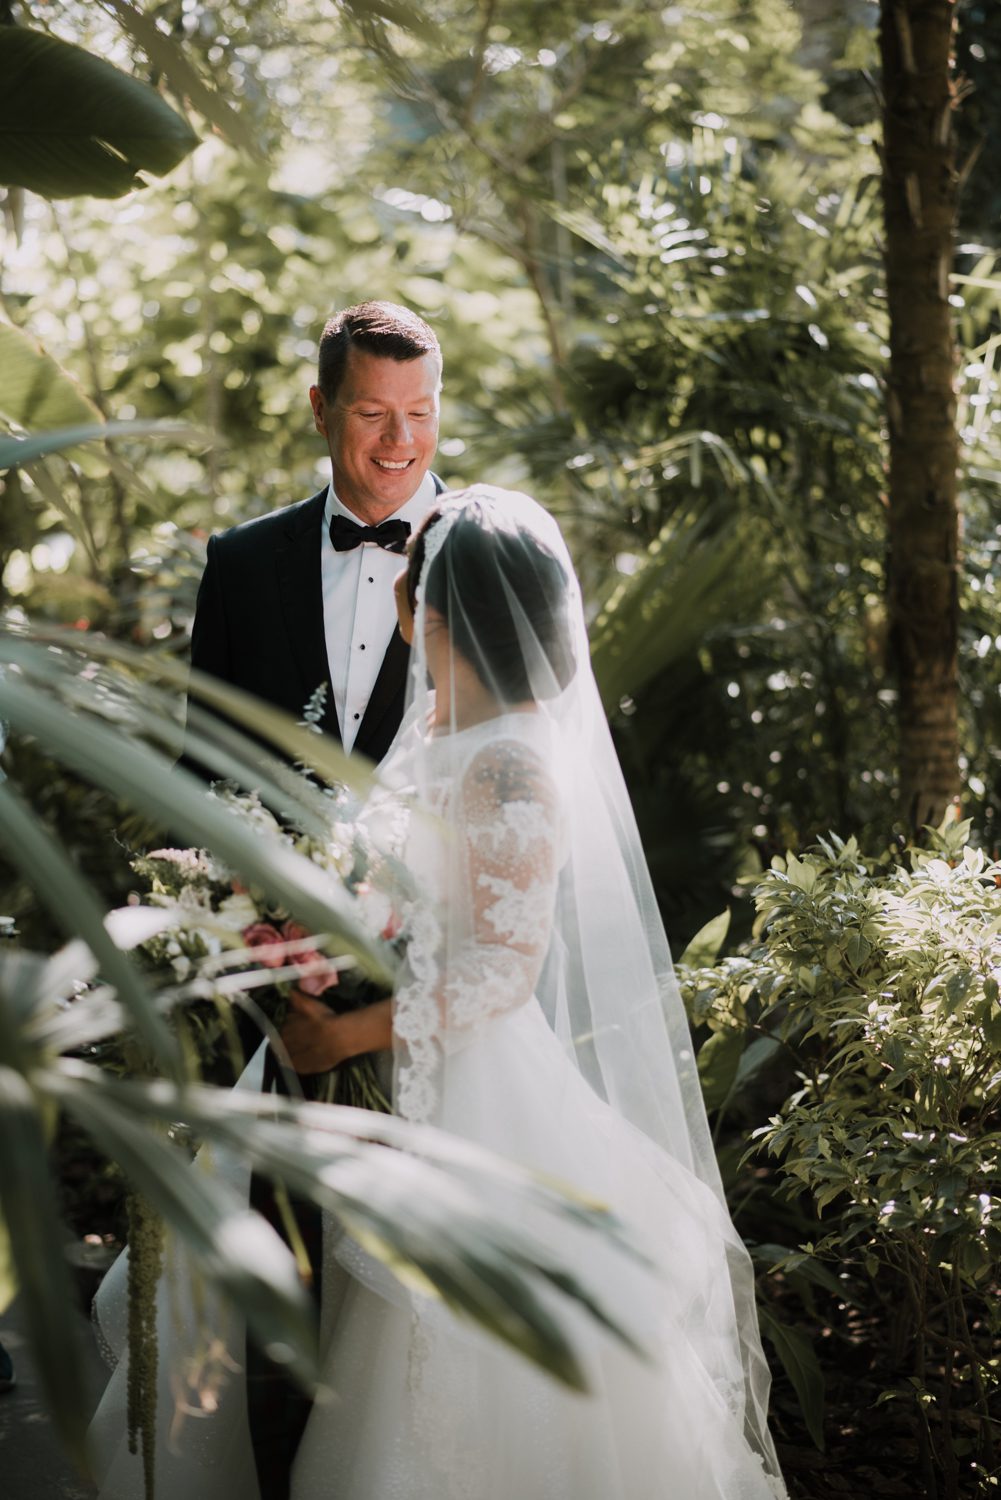 Bride and groom exchanging vows under the lush foliage at Hemingway House, a popular wedding venue in Key West